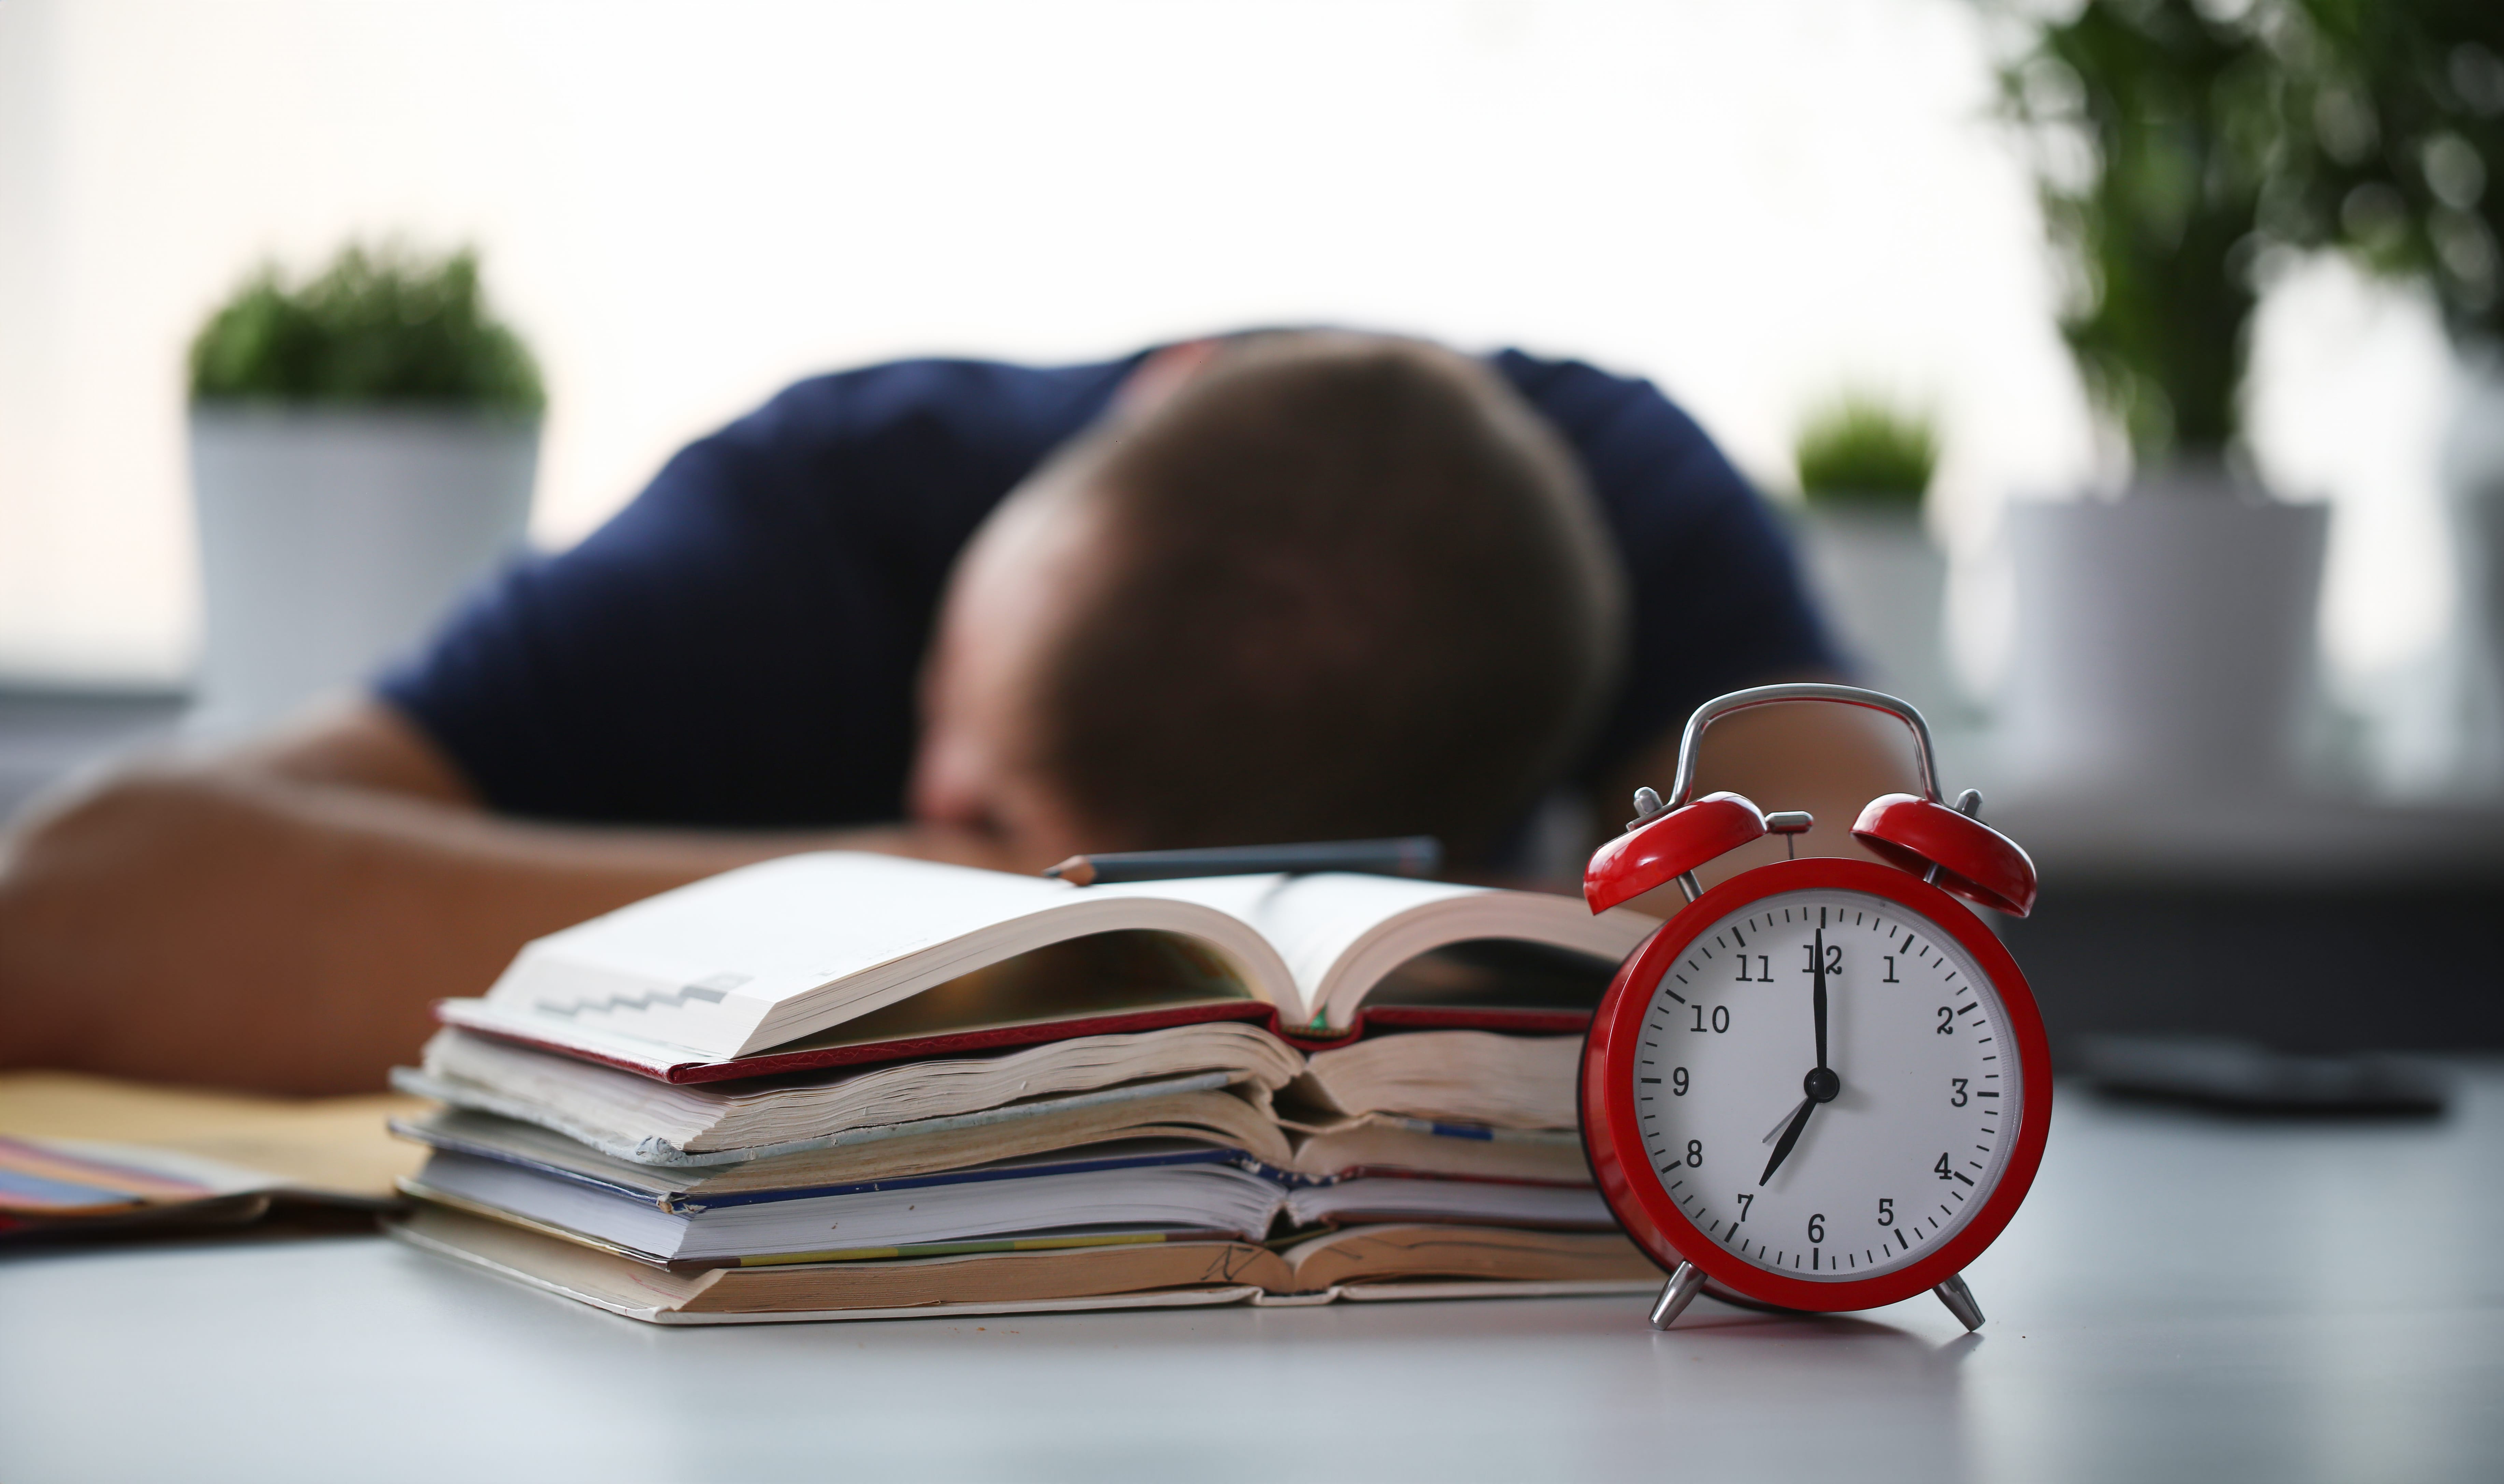 A student about to be woken up by his alarm clock after falling asleep at his desk with his head resting on a pile of books he was using for studying.